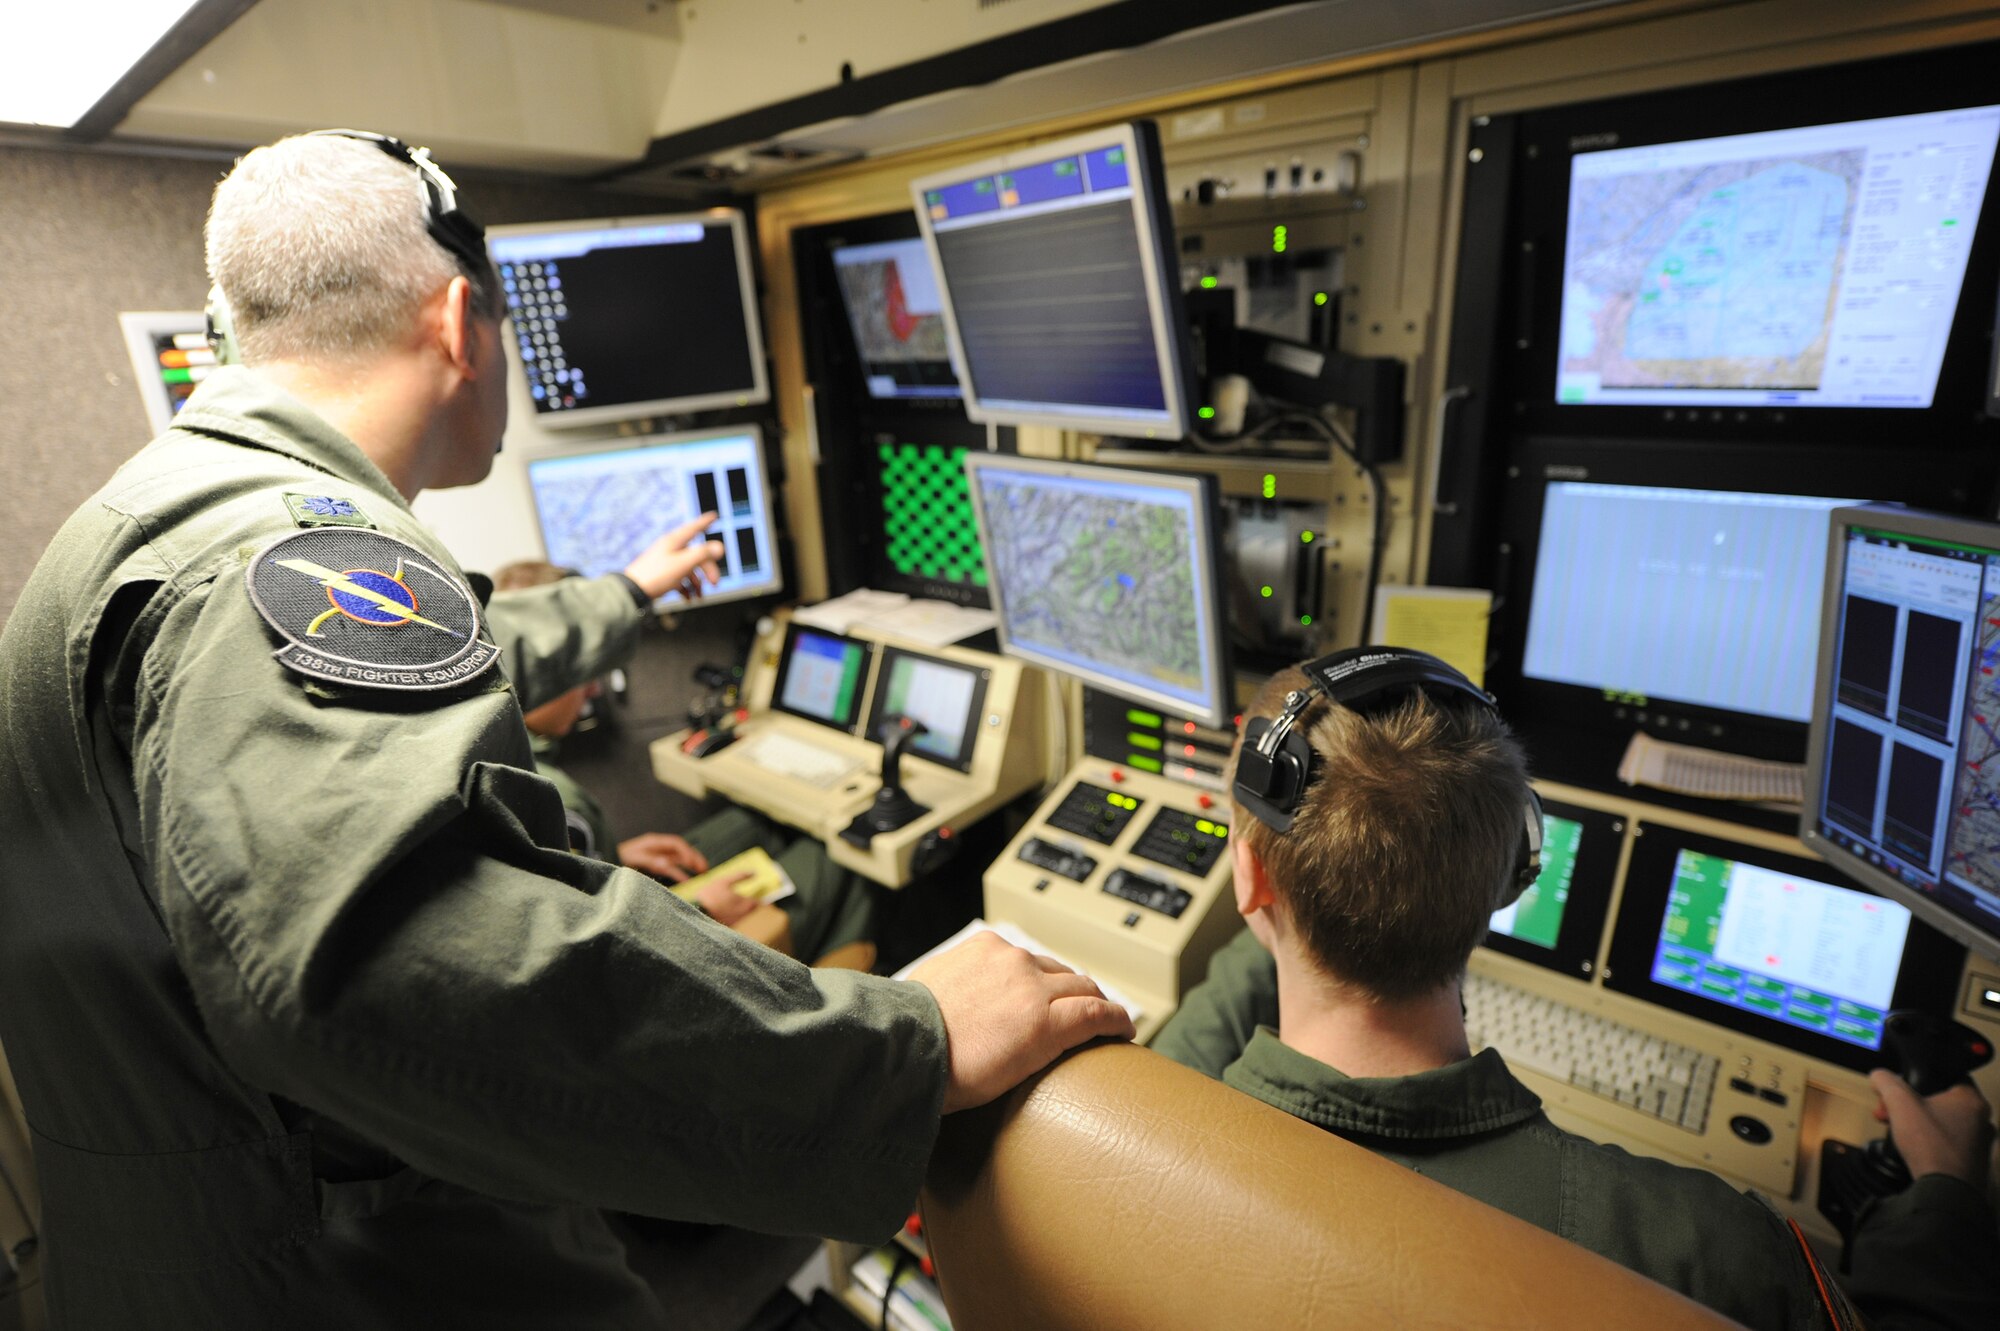 An instructor pilot makes a point during a MQ-9 Reaper training mission flown from a ground-based cockpit located at Hancock Field Air National Guard Base, Syracuse, New York.  The 174th Fighter Wing is the only Air National Guard unit in the country to operate a MQ-9 Formal Training Unit (FTU) program to train aircrews from the active duty Air Force, Air National Guard and Air Force Reserve.(photo by Tech. Sgt. Ricky Best/Released)
